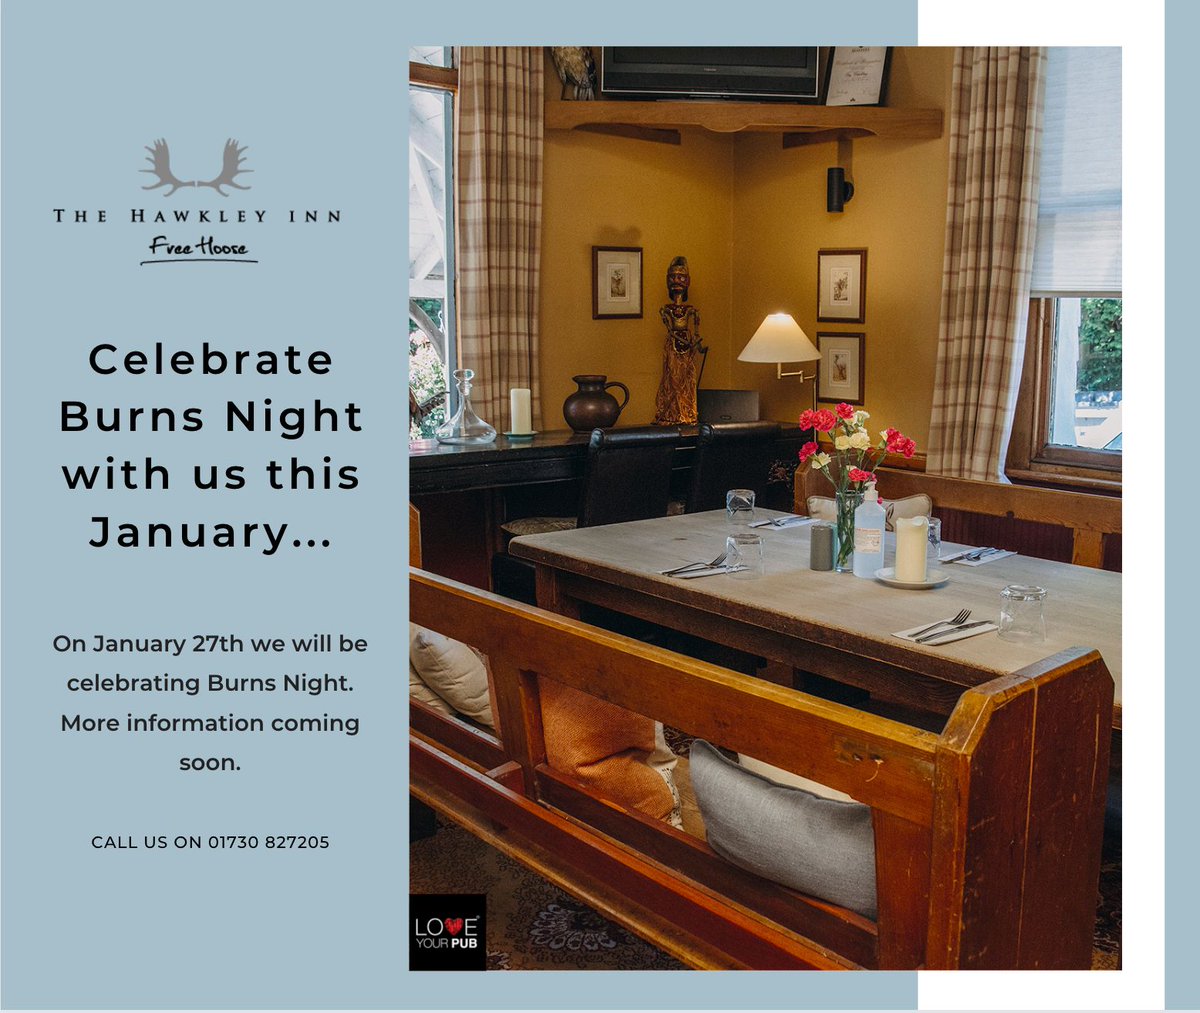 A date for your diary...we have exciting news! 
We will be celebrating Burns Night here on the 27th January. More details to follow soon.

 #countrybreaks #bestfood #locallysourced #drinks #countrypubs #christmasmenu #hampshirepubs #bestpubs #bar #staycation #countrysidestays